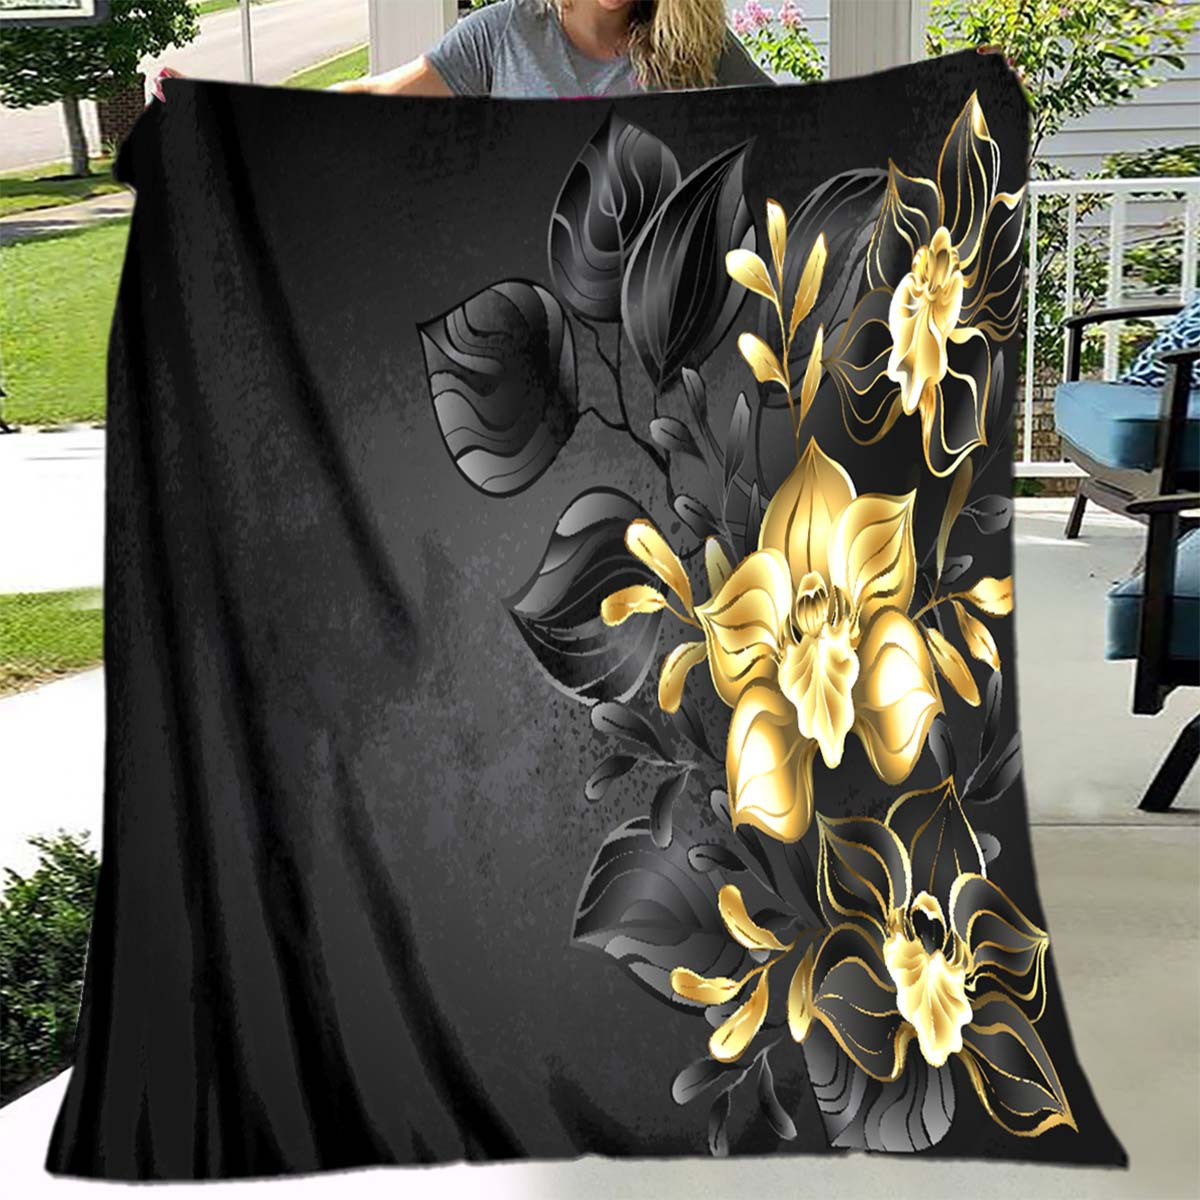 

3d Rose Soft Flannel Throw Blanket For Living Room Bedroom Bed Sofa Picnic Cover Decor Napping Couch Chair Cover